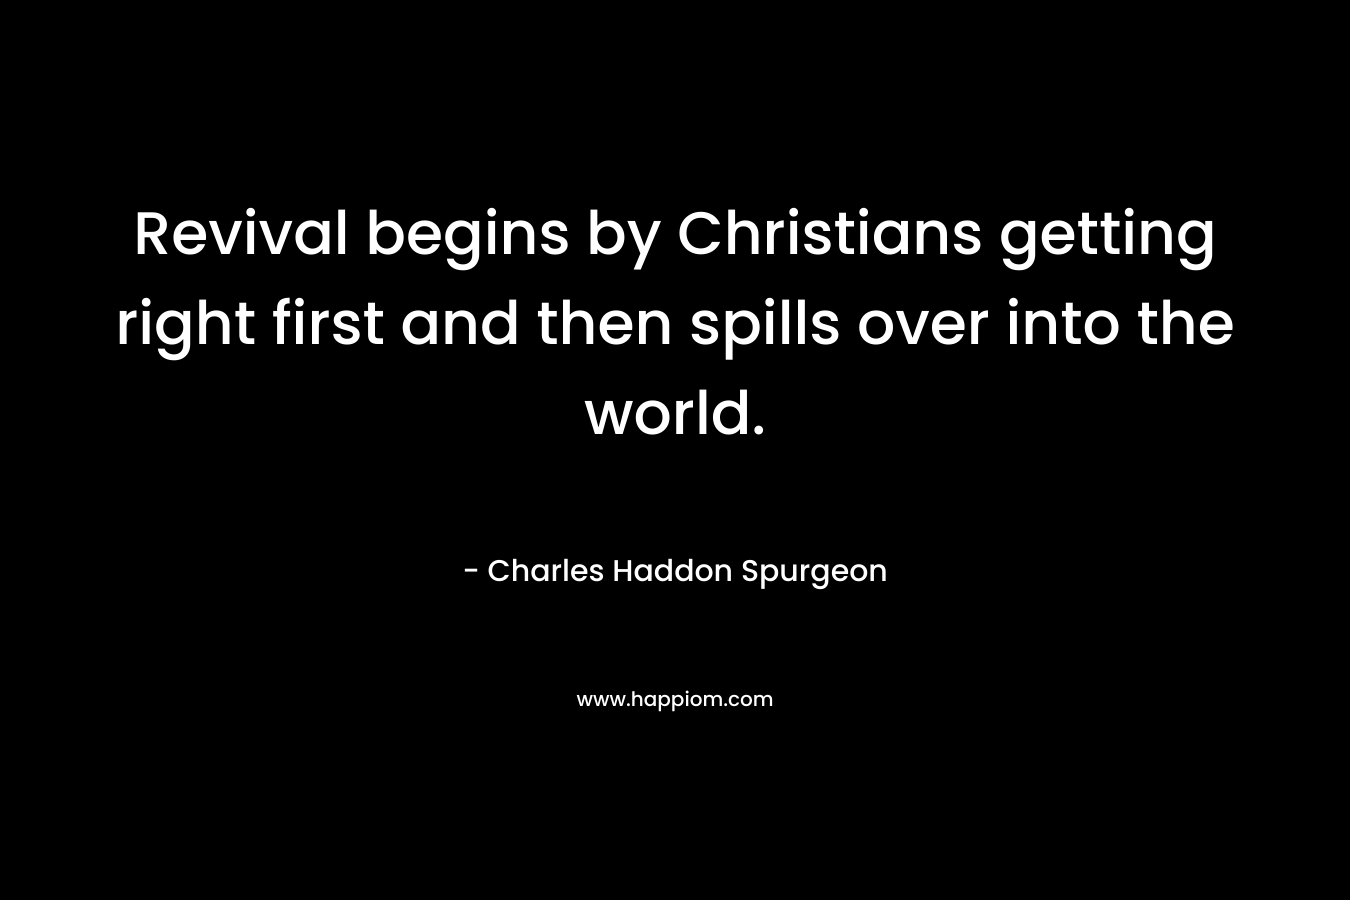 Revival begins by Christians getting right first and then spills over into the world. – Charles Haddon Spurgeon